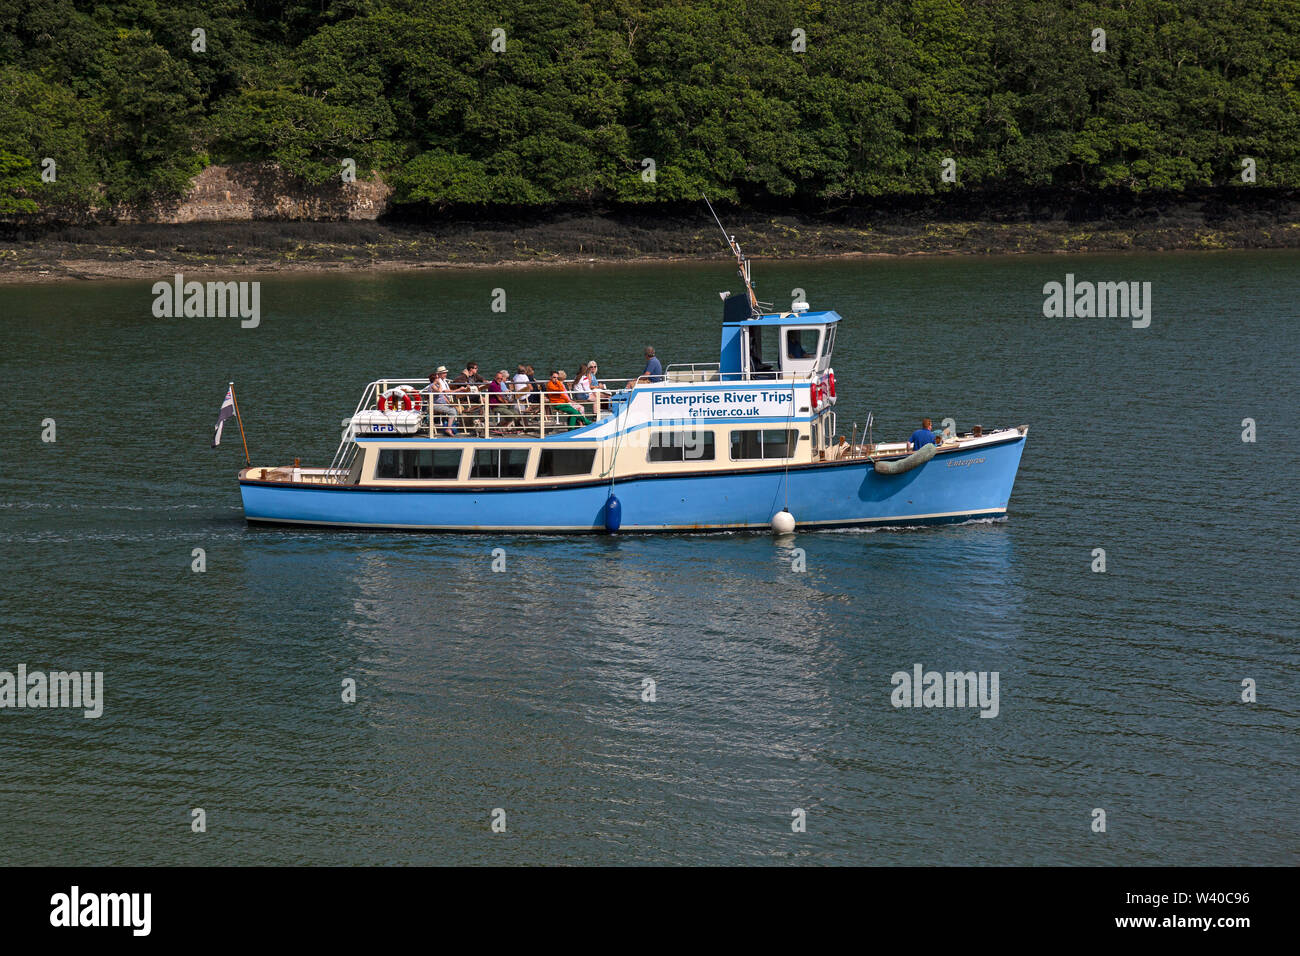 A small passenger boat belonging to Enterprise River Trips, on the Fal River Estuary in Cornwall, England. Stock Photo